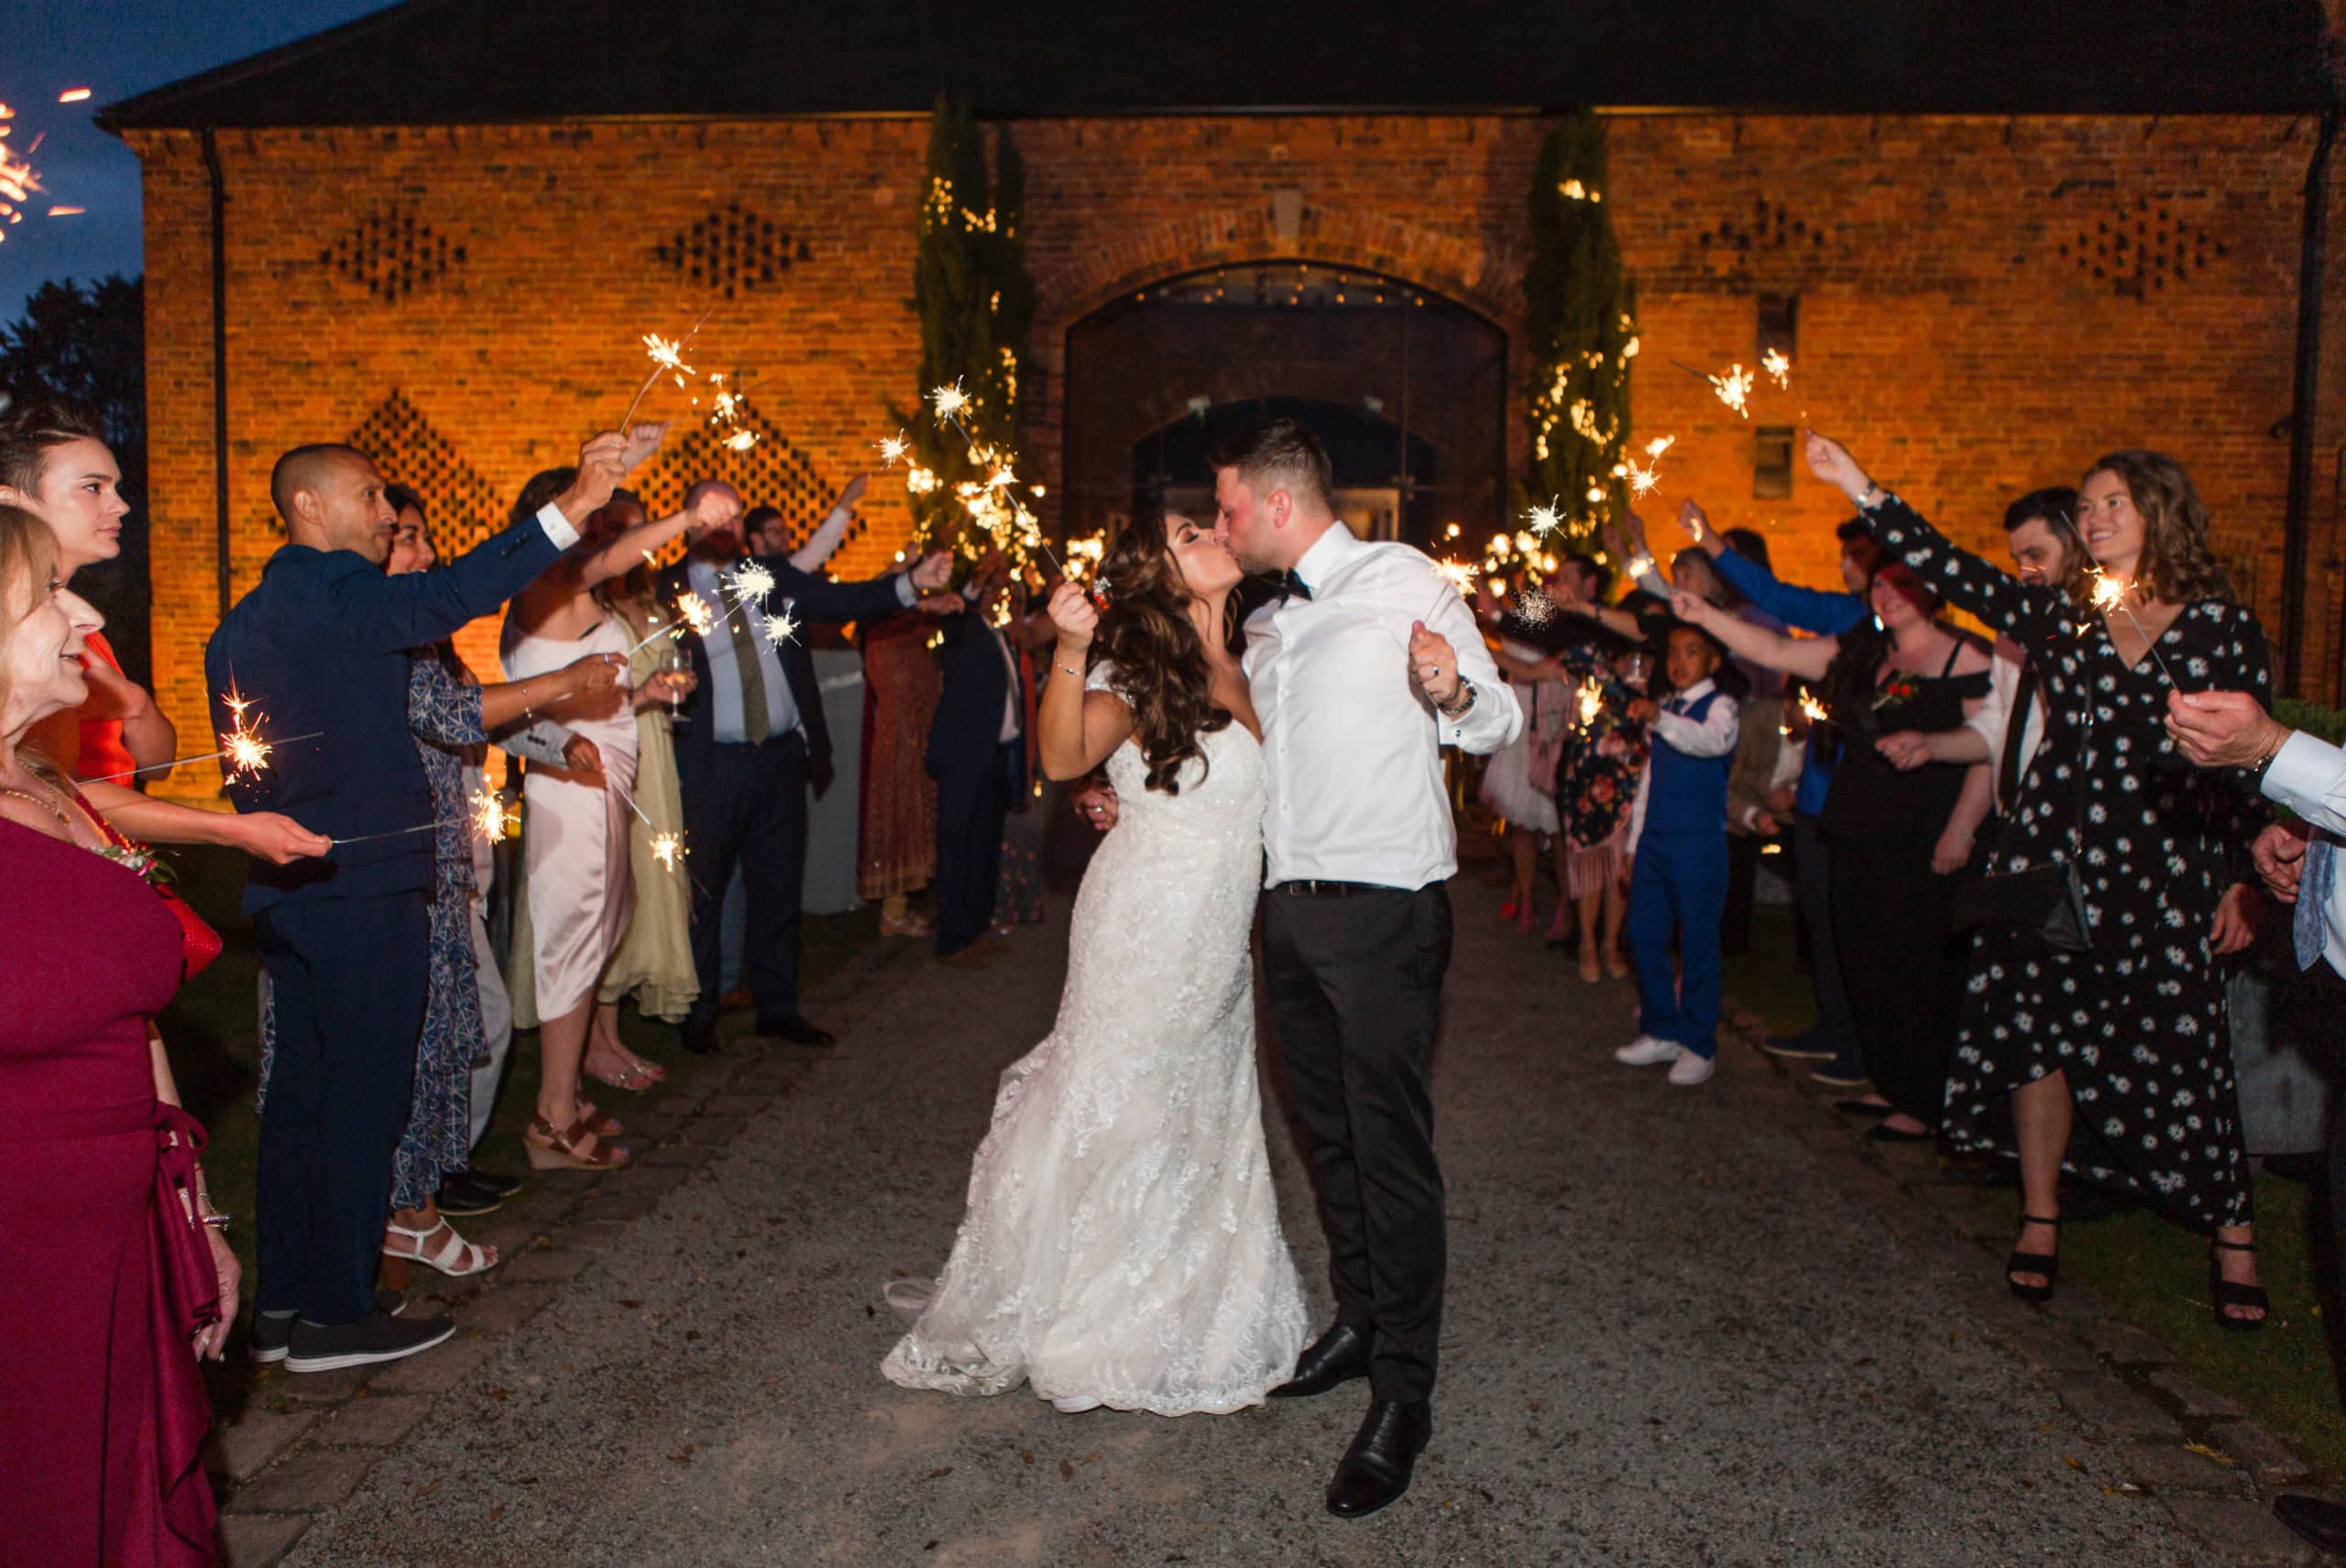 Bride and Groom kiss in front of their guests holding sparklers at night